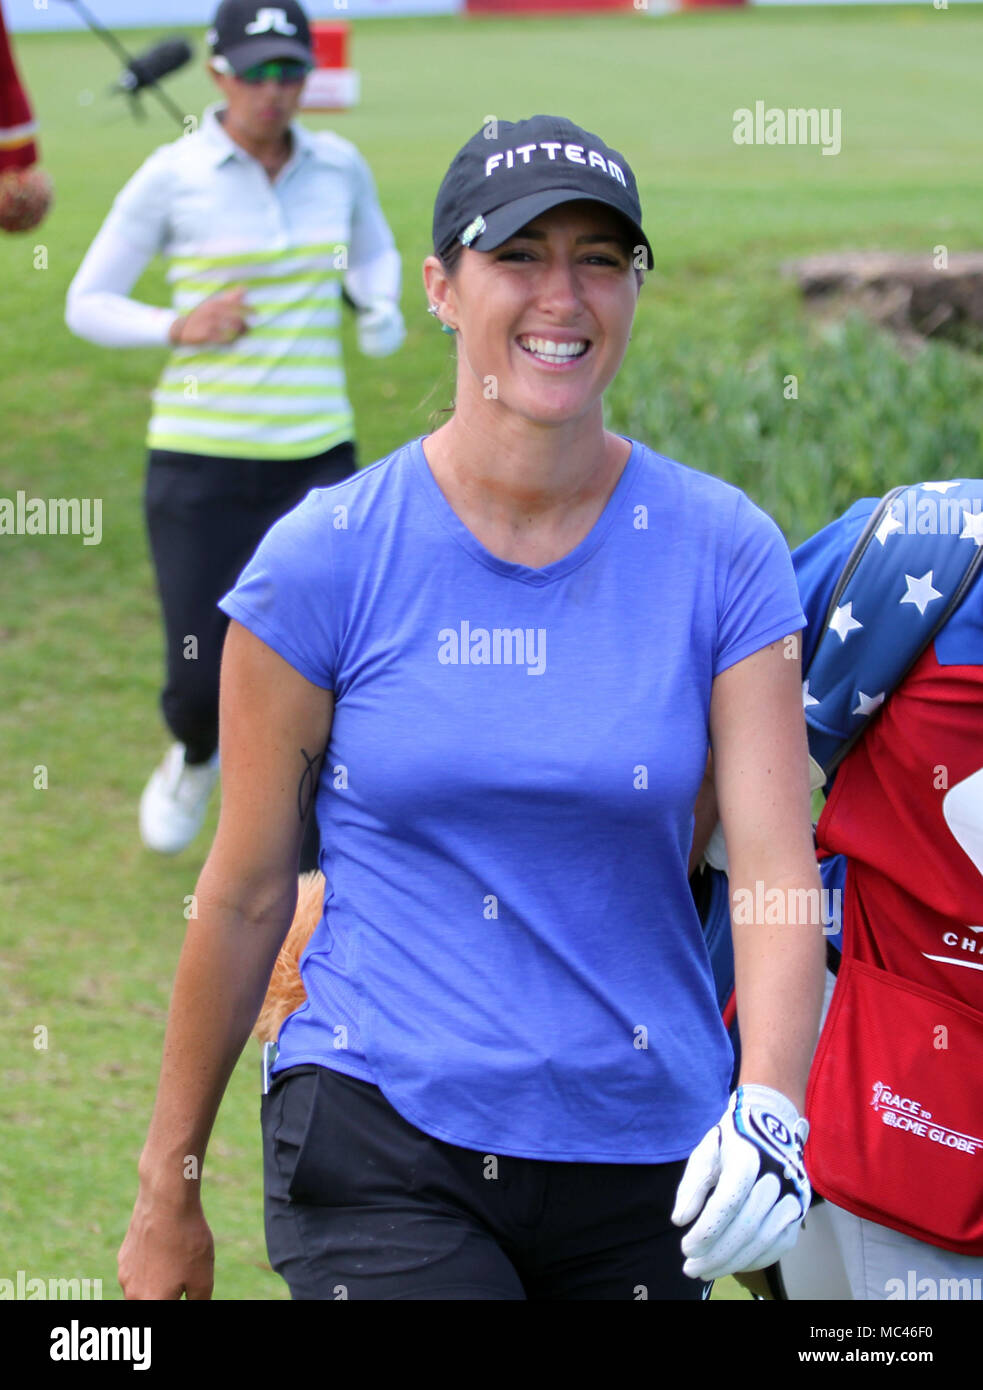 April 11, 2018 - Jaye Marie Green smiles coming off the 9th tee during the first round of the LPGA LOTTE Championship at the Ko Olina Golf Club in Kapolei, HI - Michael Sullivan/CSM Stock Photo